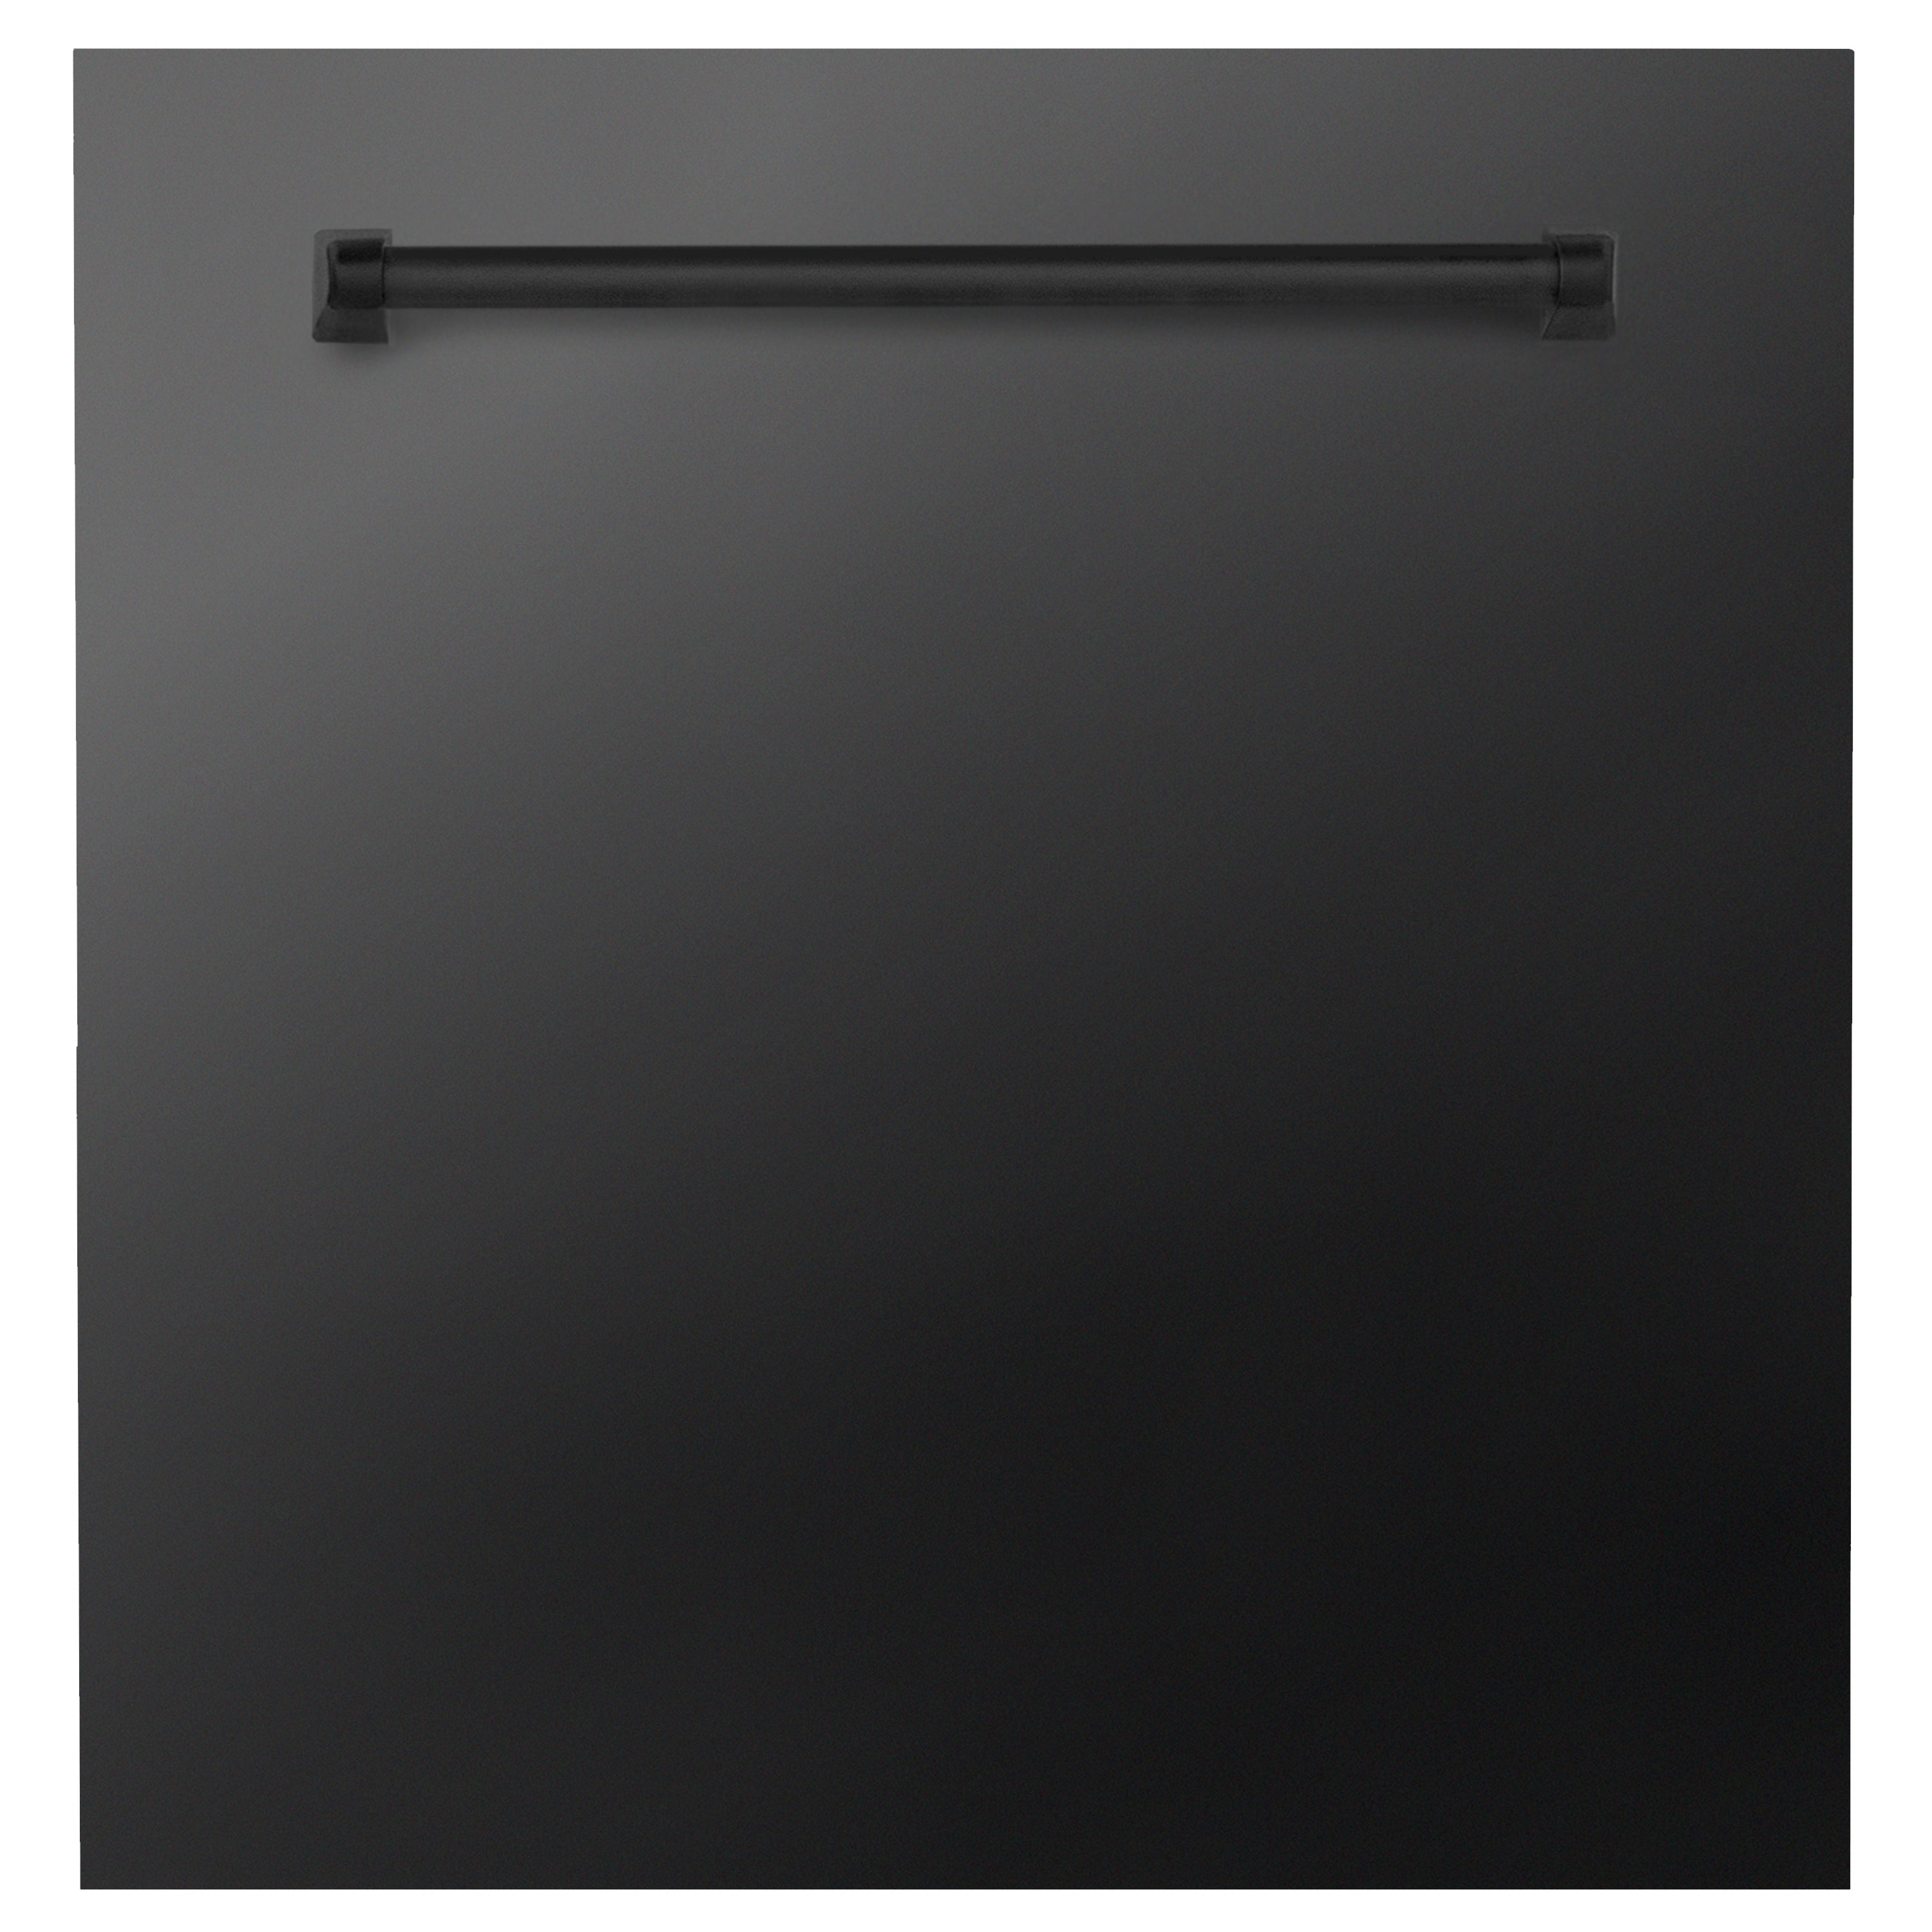 ZLINE 24" Monument Dishwasher Panel in Black Stainless Steel with Traditional Handle (DPMT-BS-24)